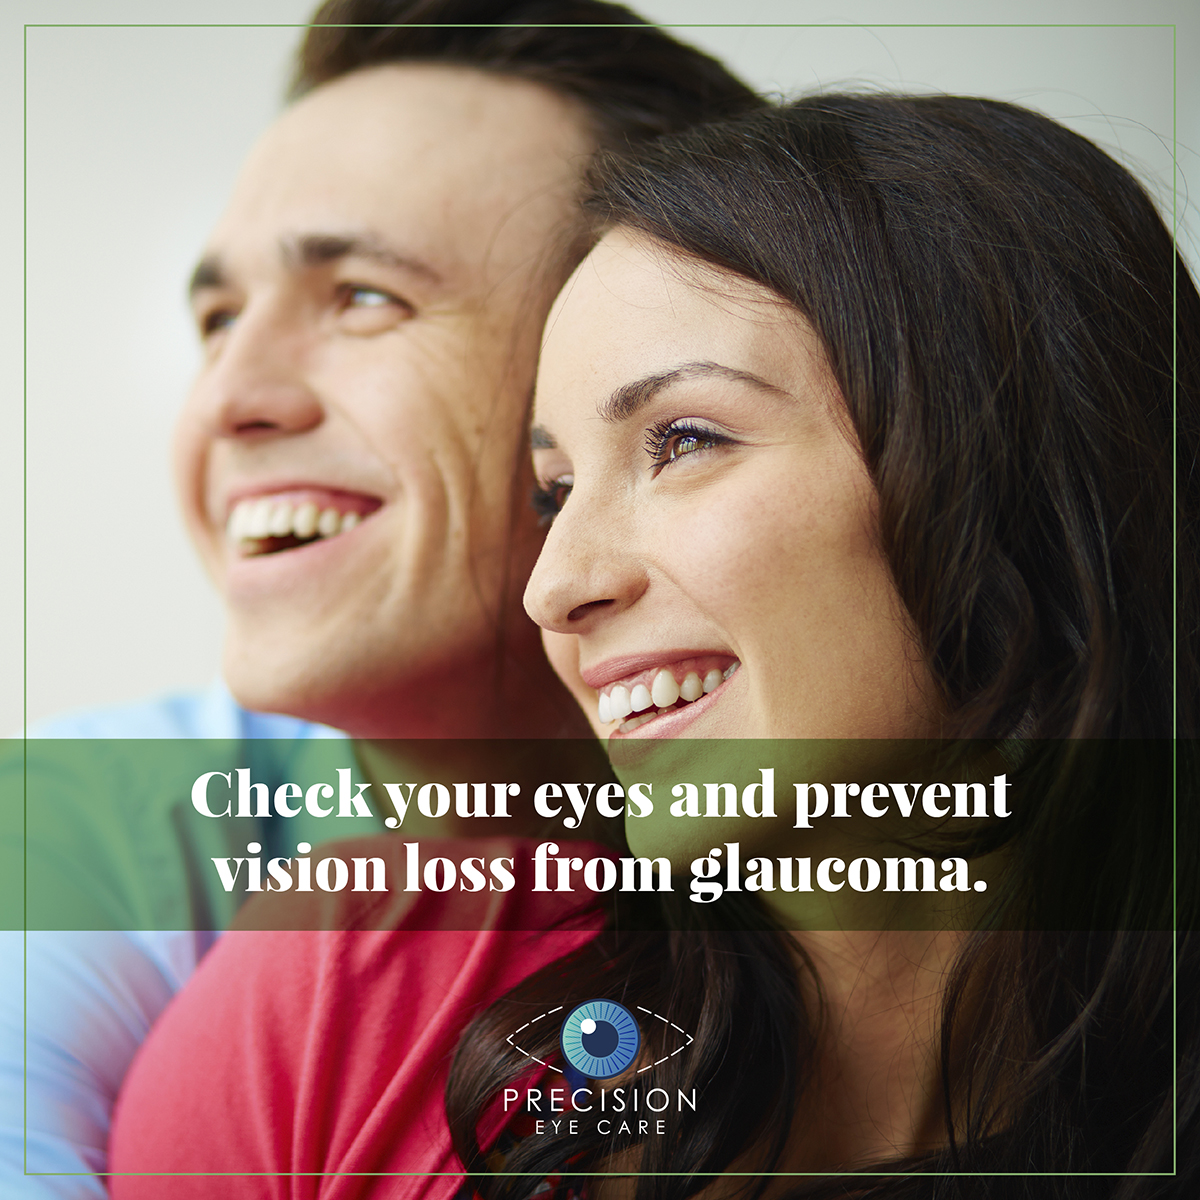 Check your eyes and prevent vision loss from glaucoma.